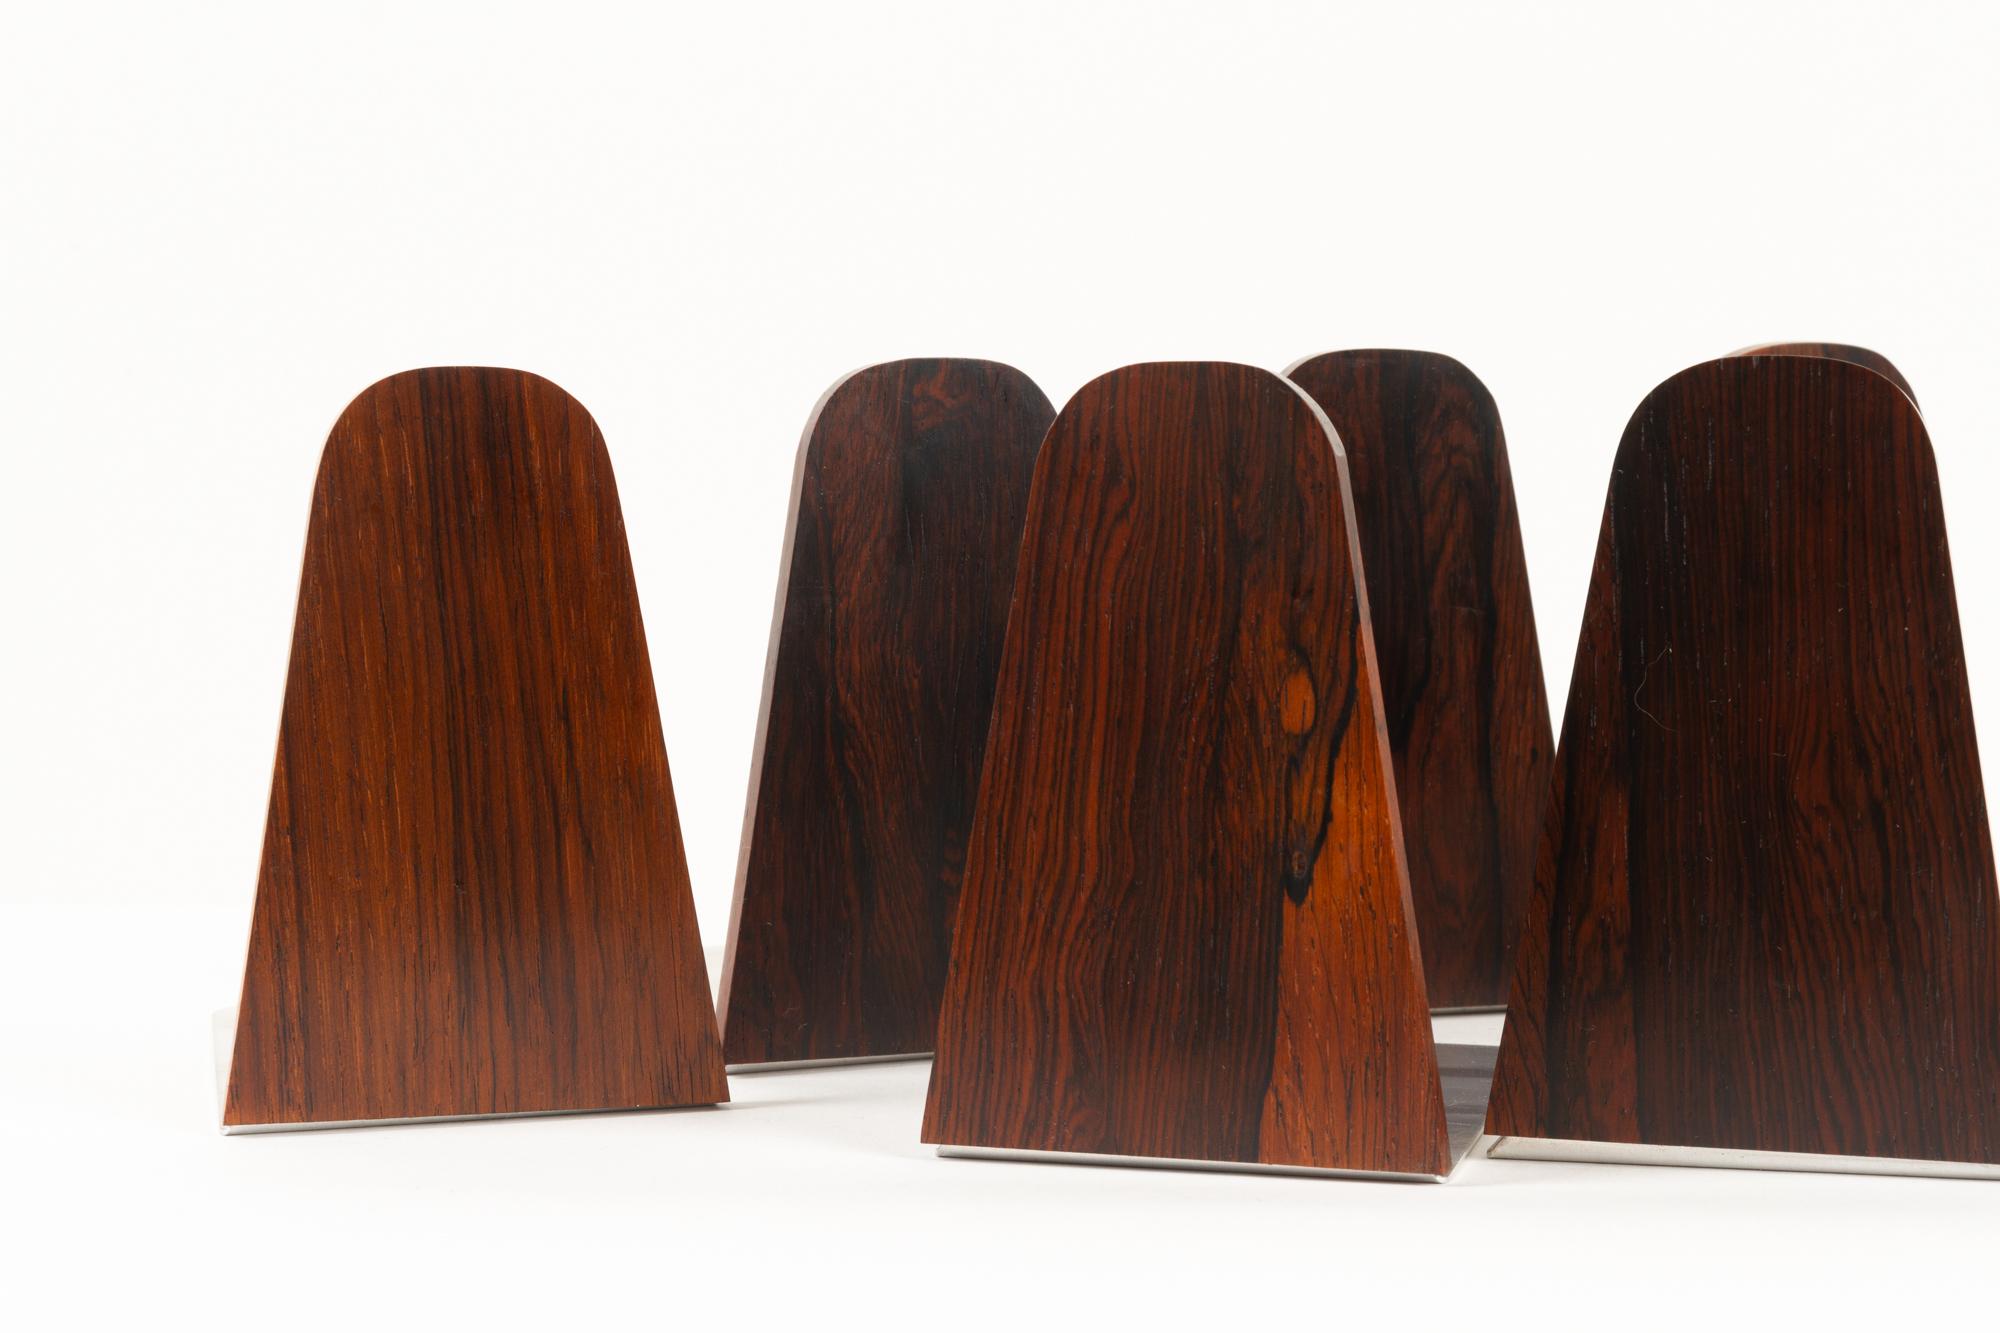 Vintage Danish rosewood book ends 1960s, set of 8.
Set of Danish Mid-Century Modern book holders in rosewood with with metal feet. Beautiful and expressive grain pattern and color.
Cleaned and polished. Ready for use.